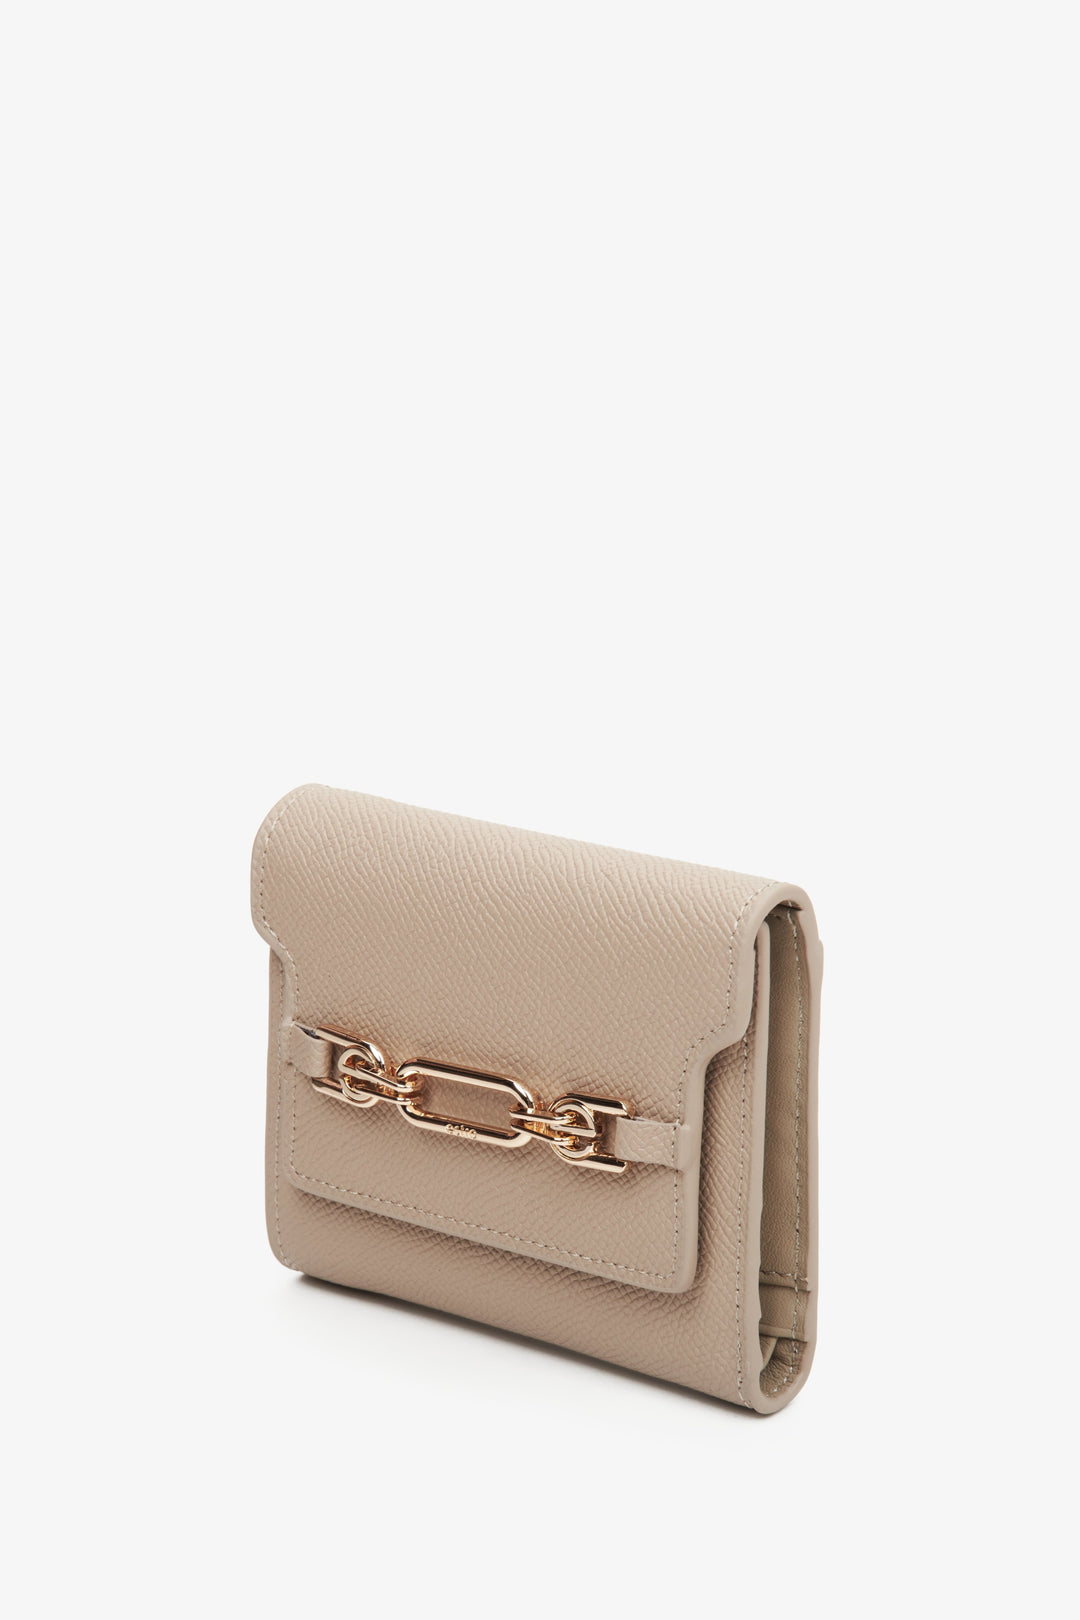 Women's beige leather wallet with a gold clasp, Estro.